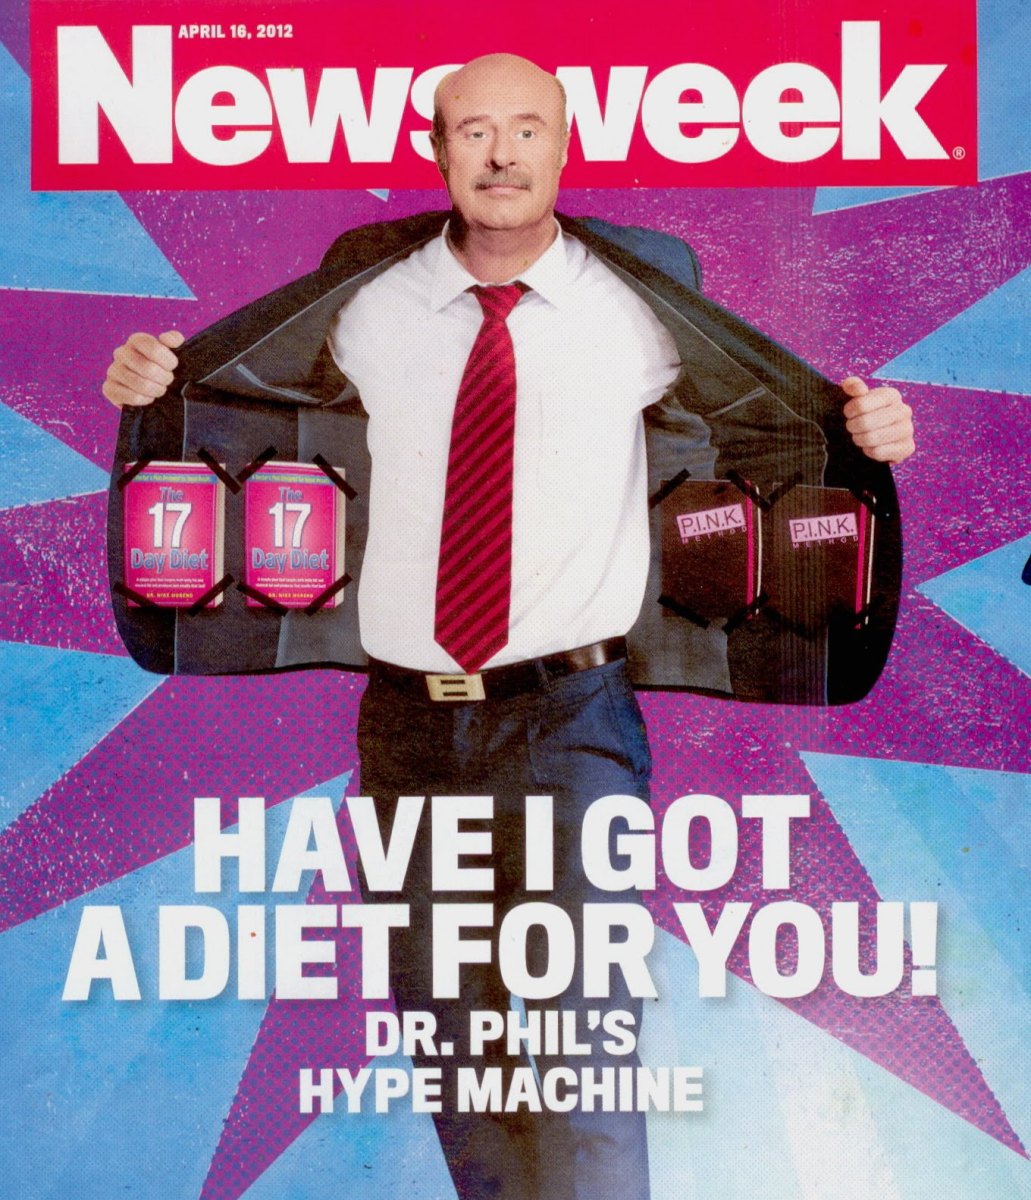 Dr. Phil Diet Plan: The 20/20 Diet Review | HubPages